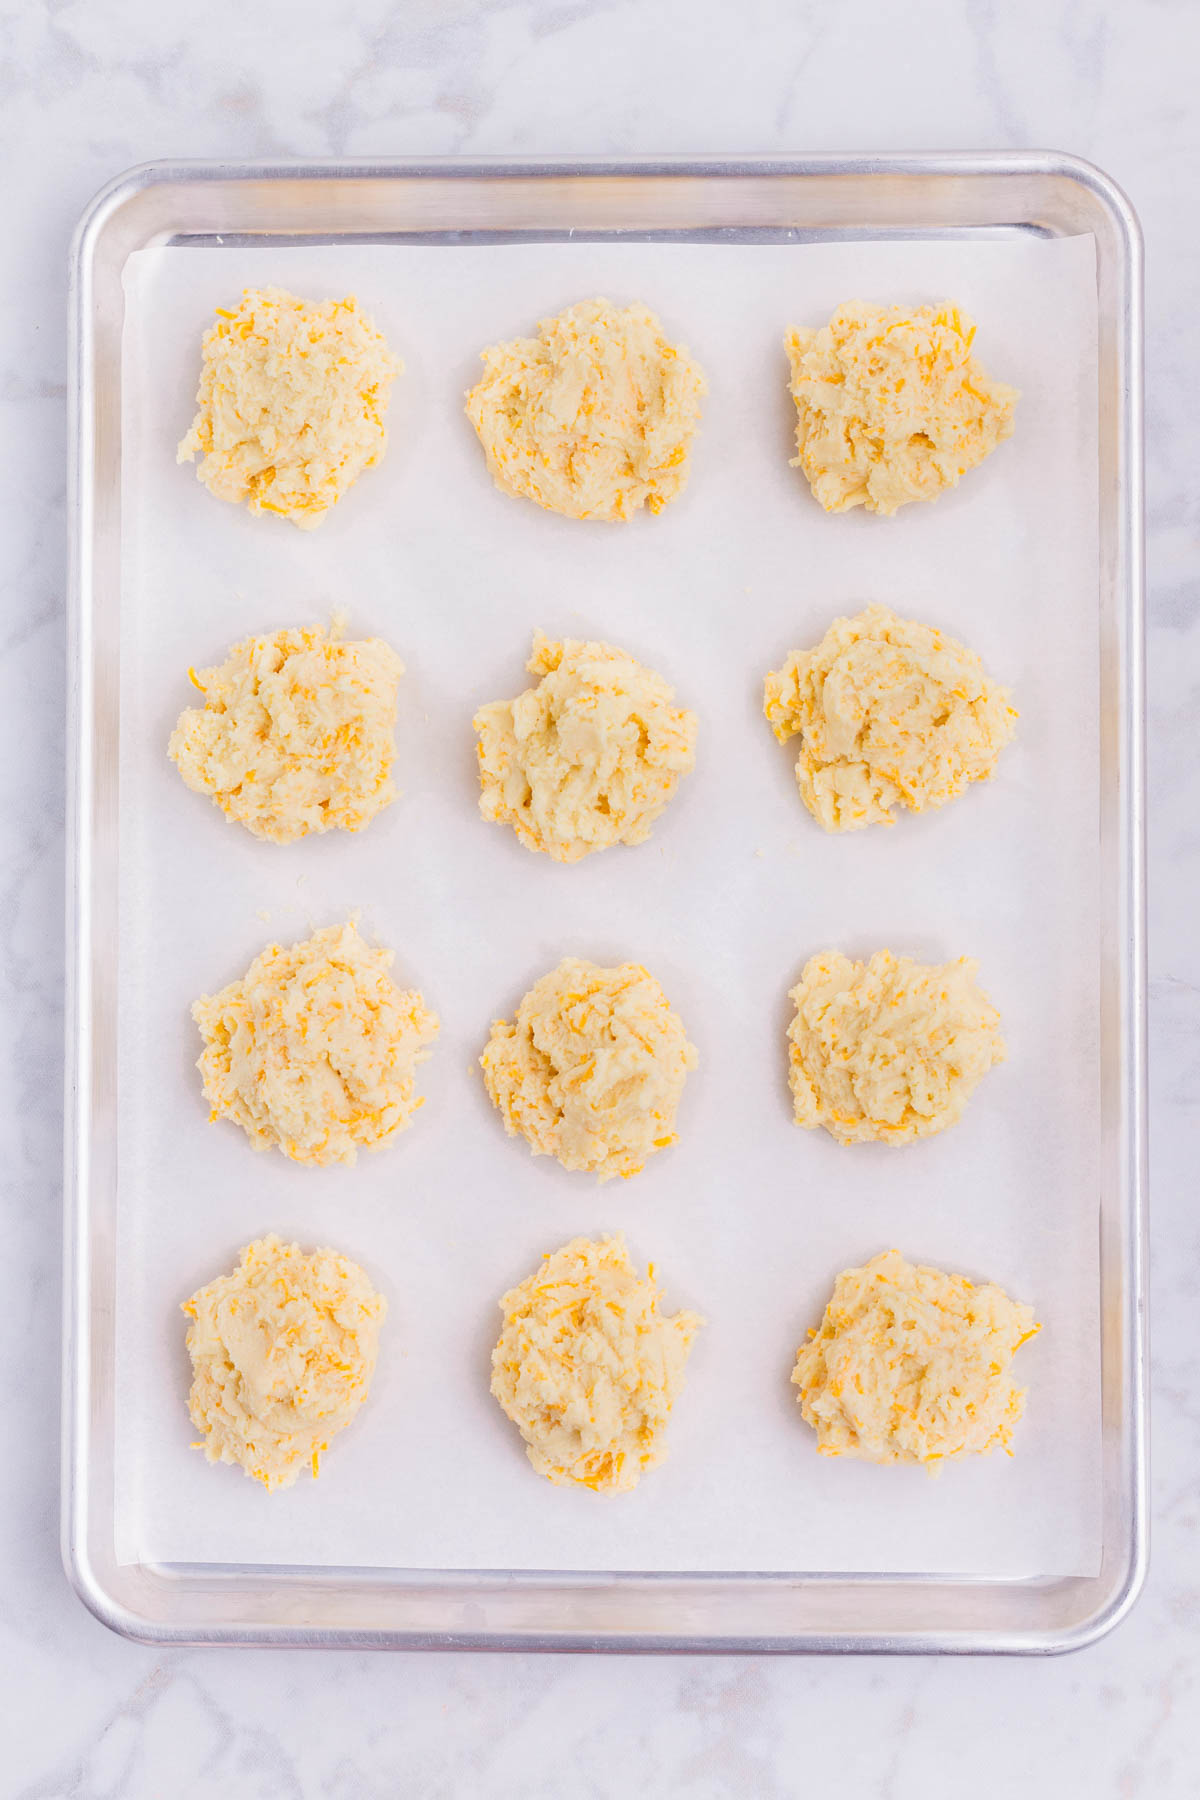 12 biscuits are dropped on a baking sheet lined with parchment paper.